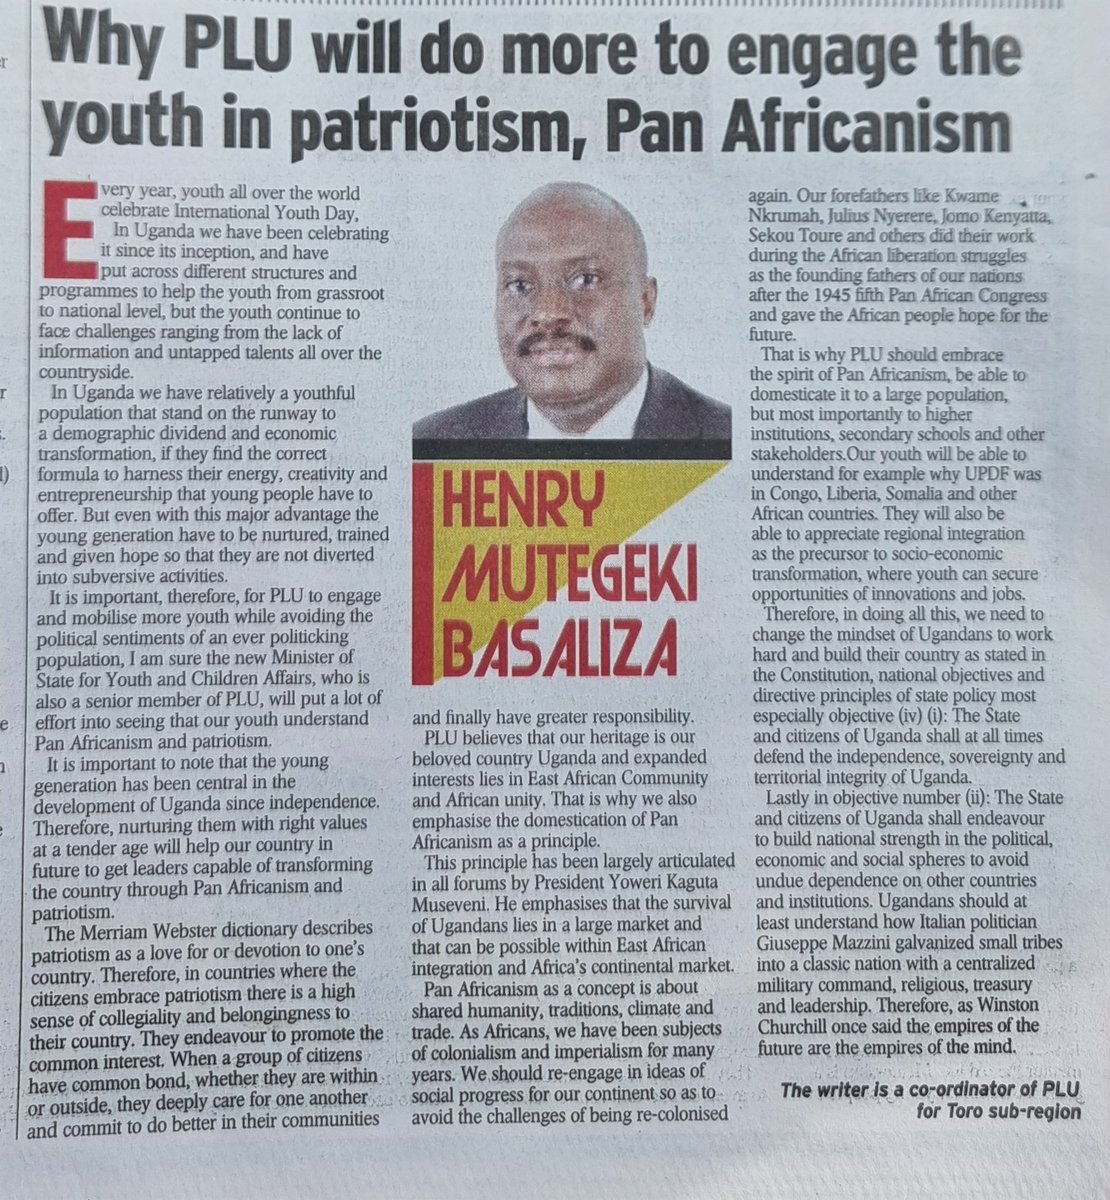 A good morning the Patriotic League of Uganda @Pl_uganda . Have u taken time to get thru this Piece by our comrade @HenryBasaliza1 coordinator Tooro Sub-region? Follow him as we learn together. And thank you adding a brick on our cause. Blessings @mkainerugaba @MichealMawanda1